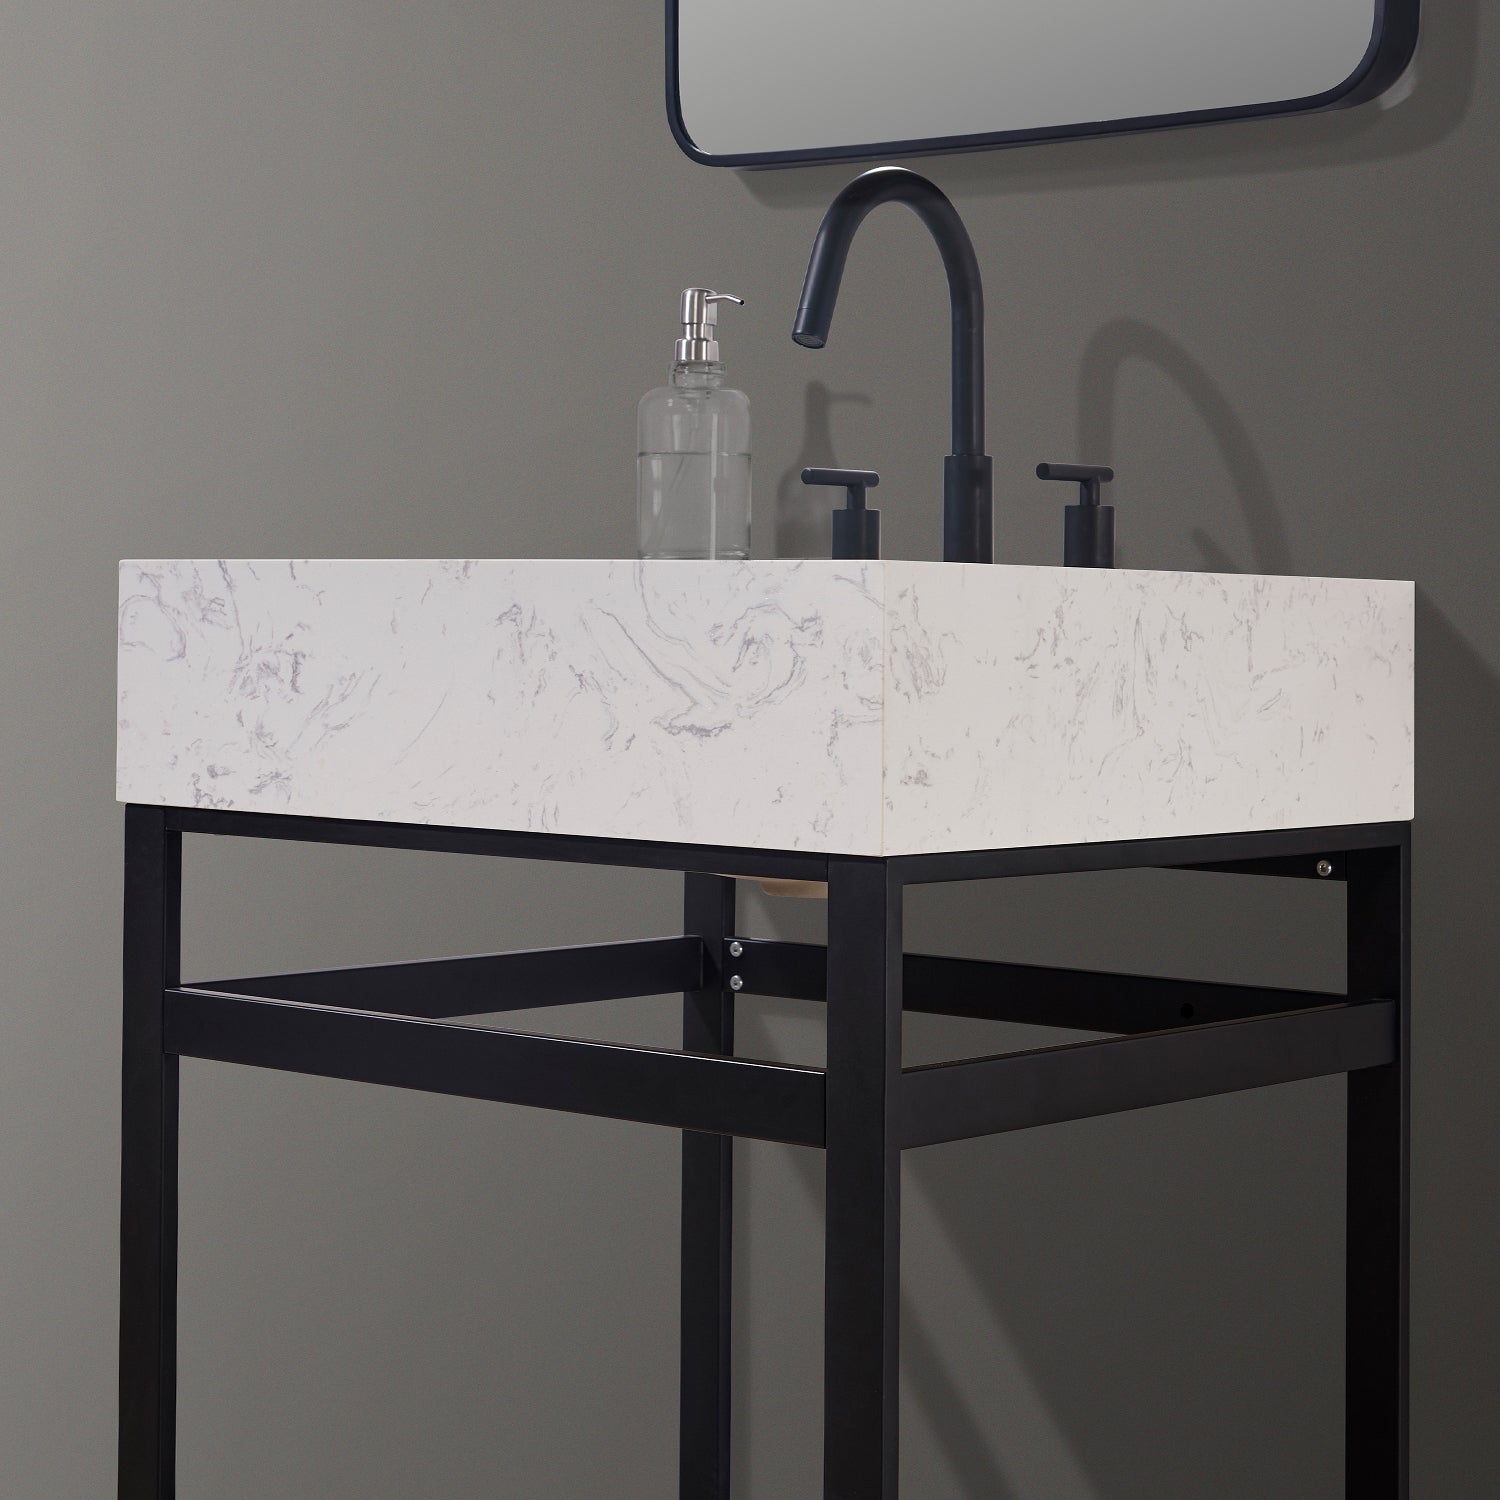 Merano 24" Single Stainless Steel Vanity Console with Aosta White Stone Countertop